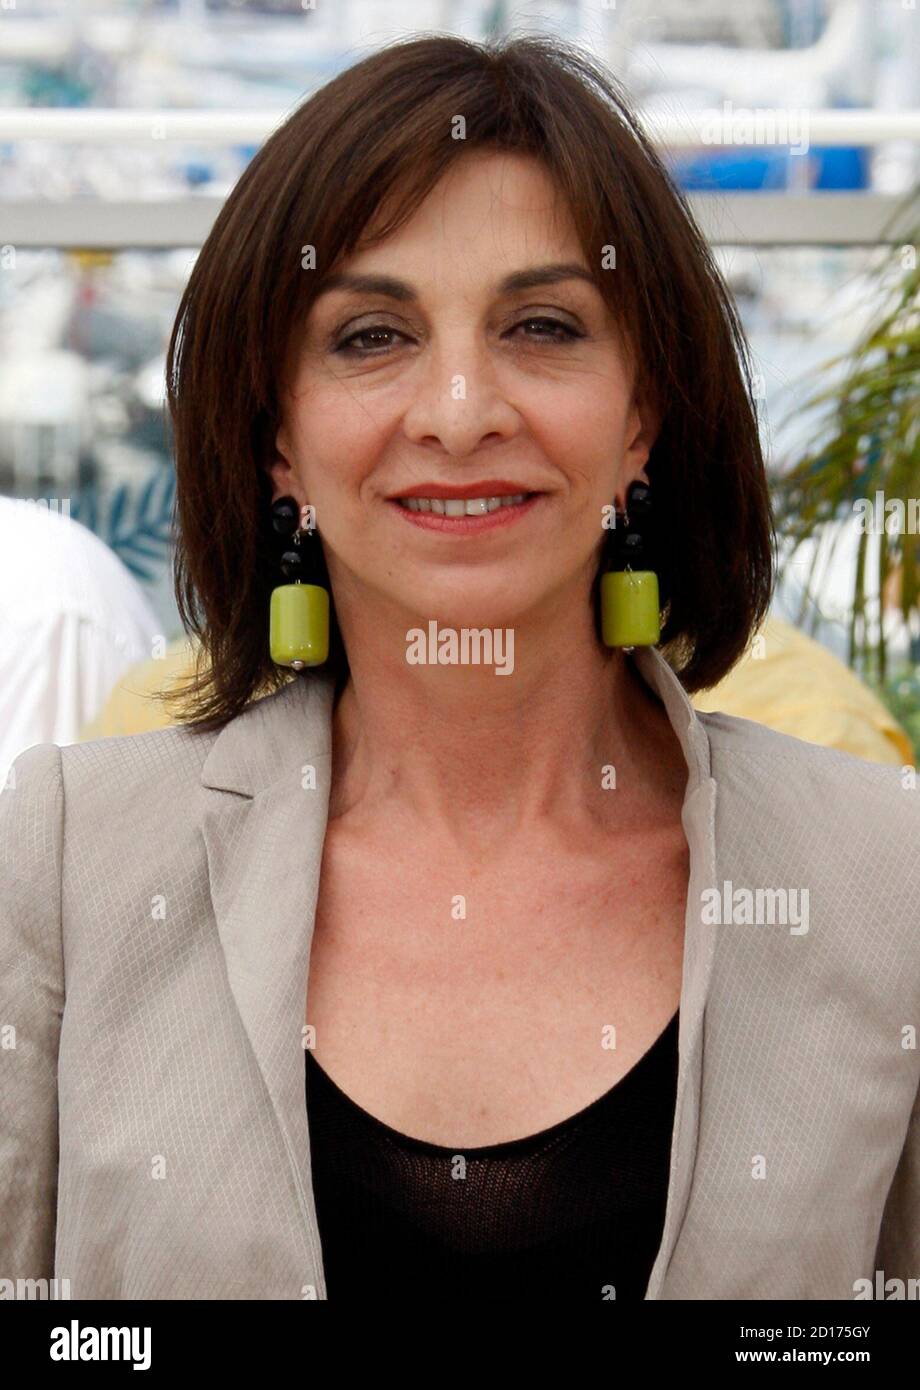 Cast member Anna Bonaiuto poses during a photocall for the film "Il Divo"  by Italian director Paolo Sorrentino at the 61st Cannes Film Festival May  23, 2008. REUTERS/Jean-Paul Pelissier (FRANCE Stock Photo -